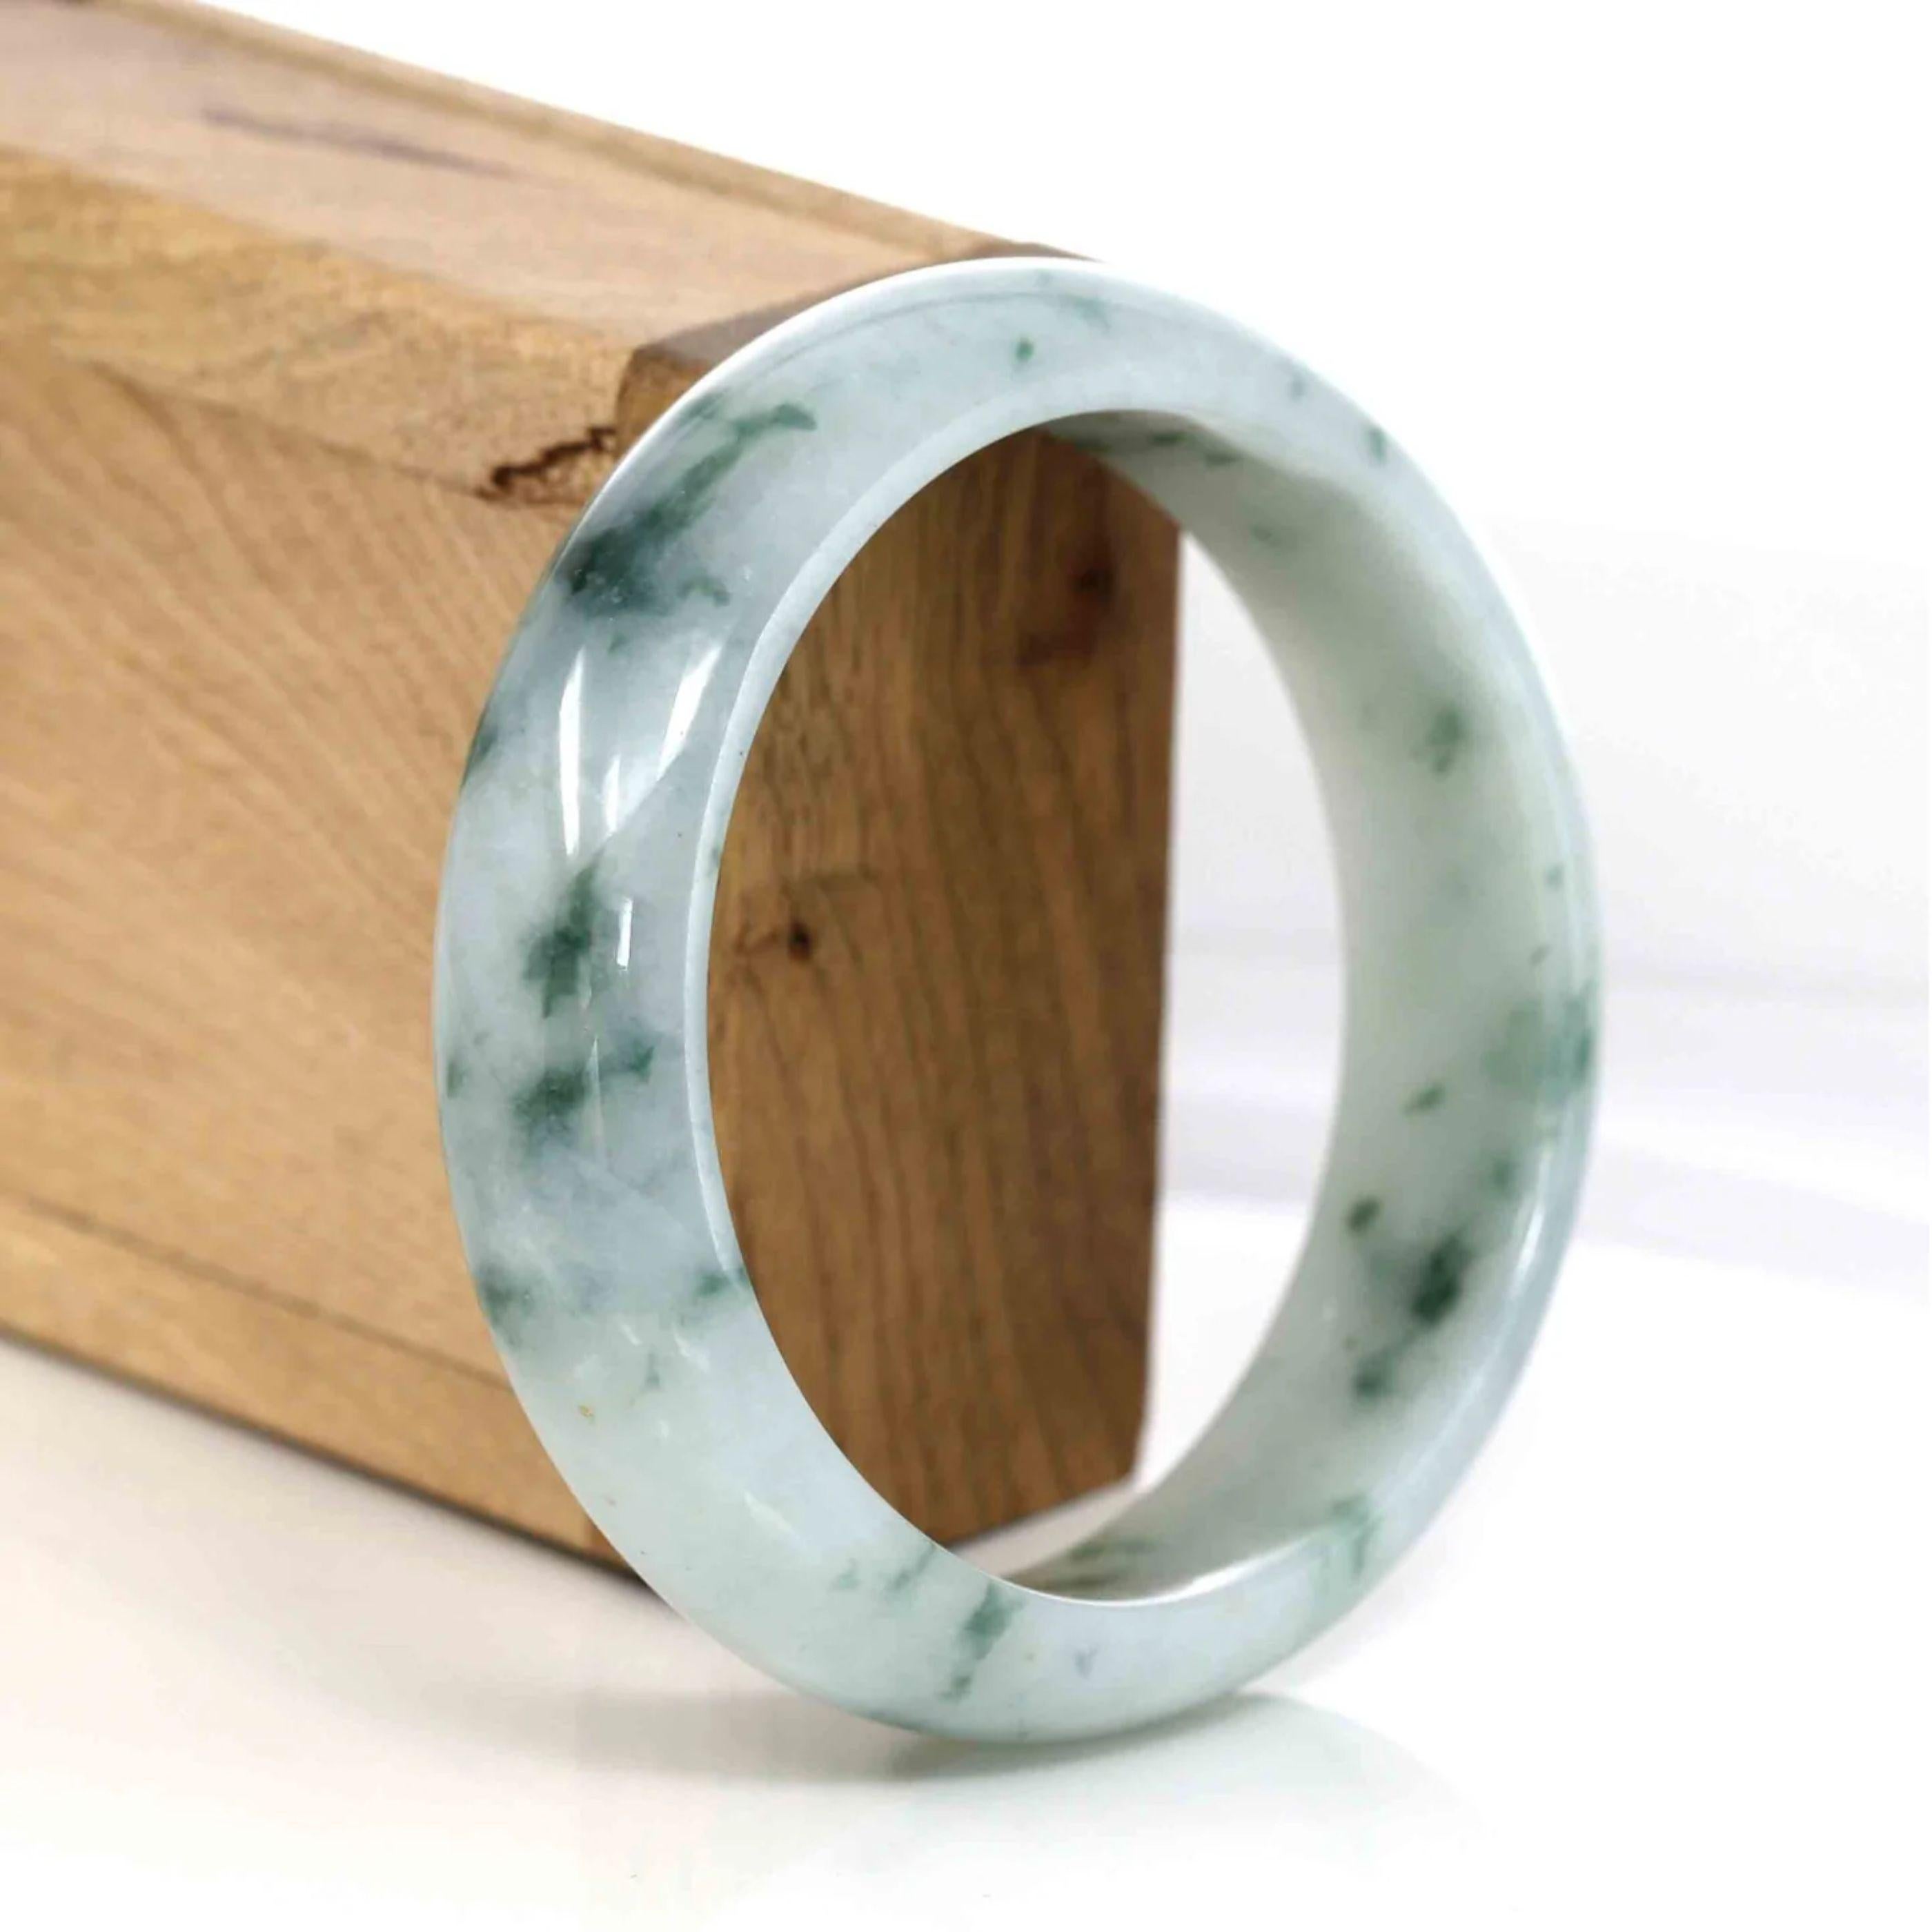 * DETAILS--This bangle is made with genuine Burmese Ice blue green Jadeite jade, The jade texture is very smooth and translucent with some blue green color inside. The blue green color looks very nice as landscape painting. It's a very unique